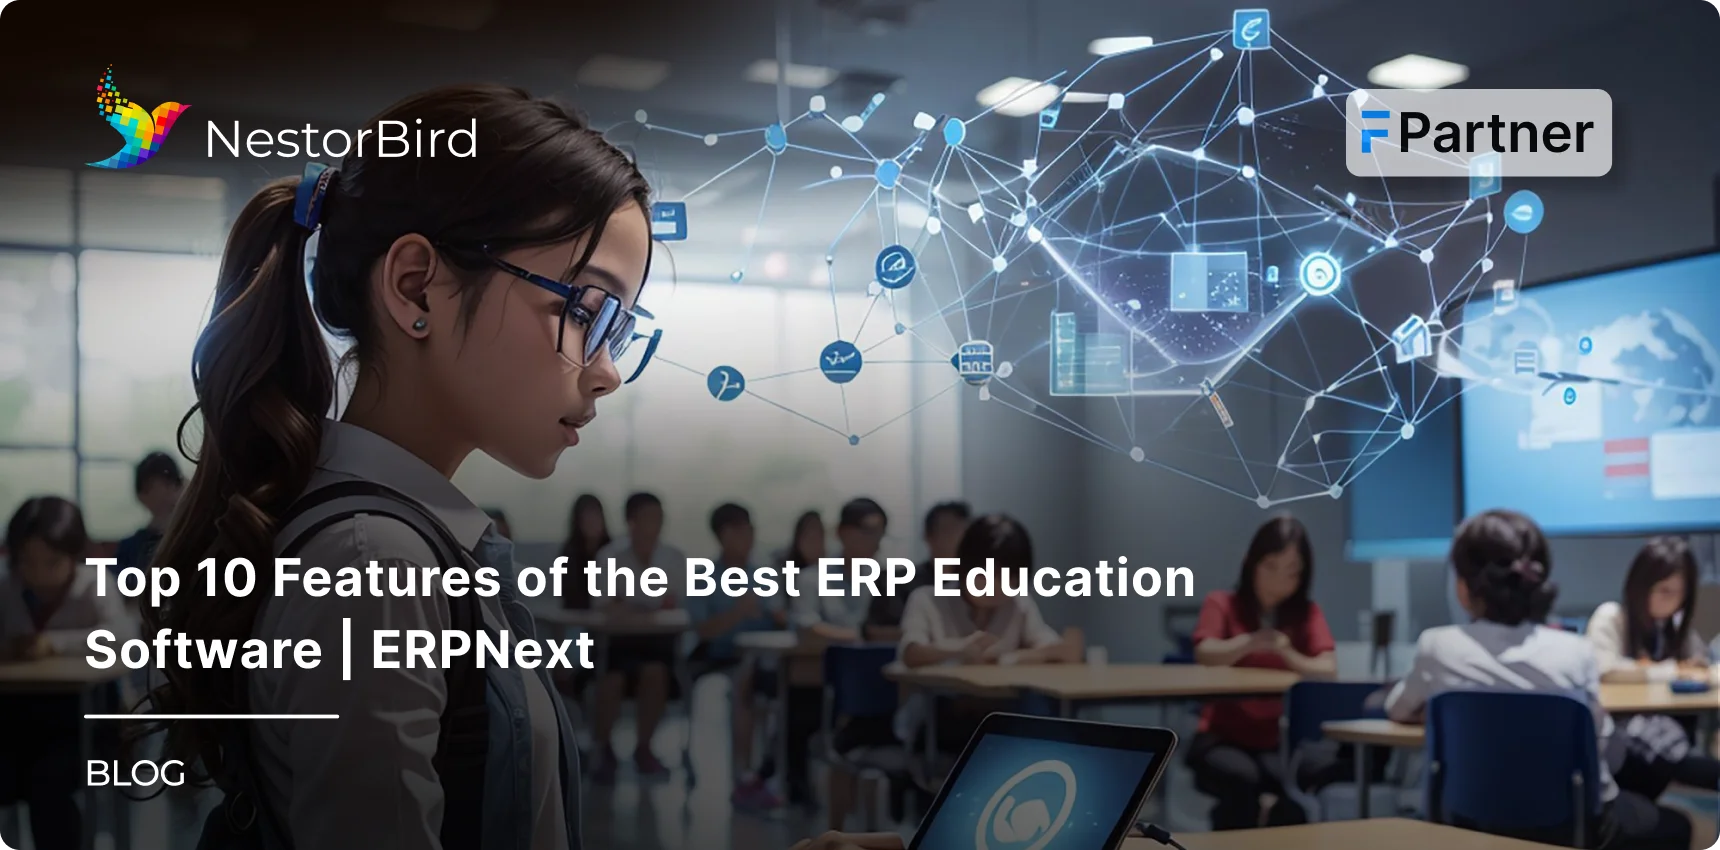 Top 10 Features of the Best ERP Education Software | ERPNext